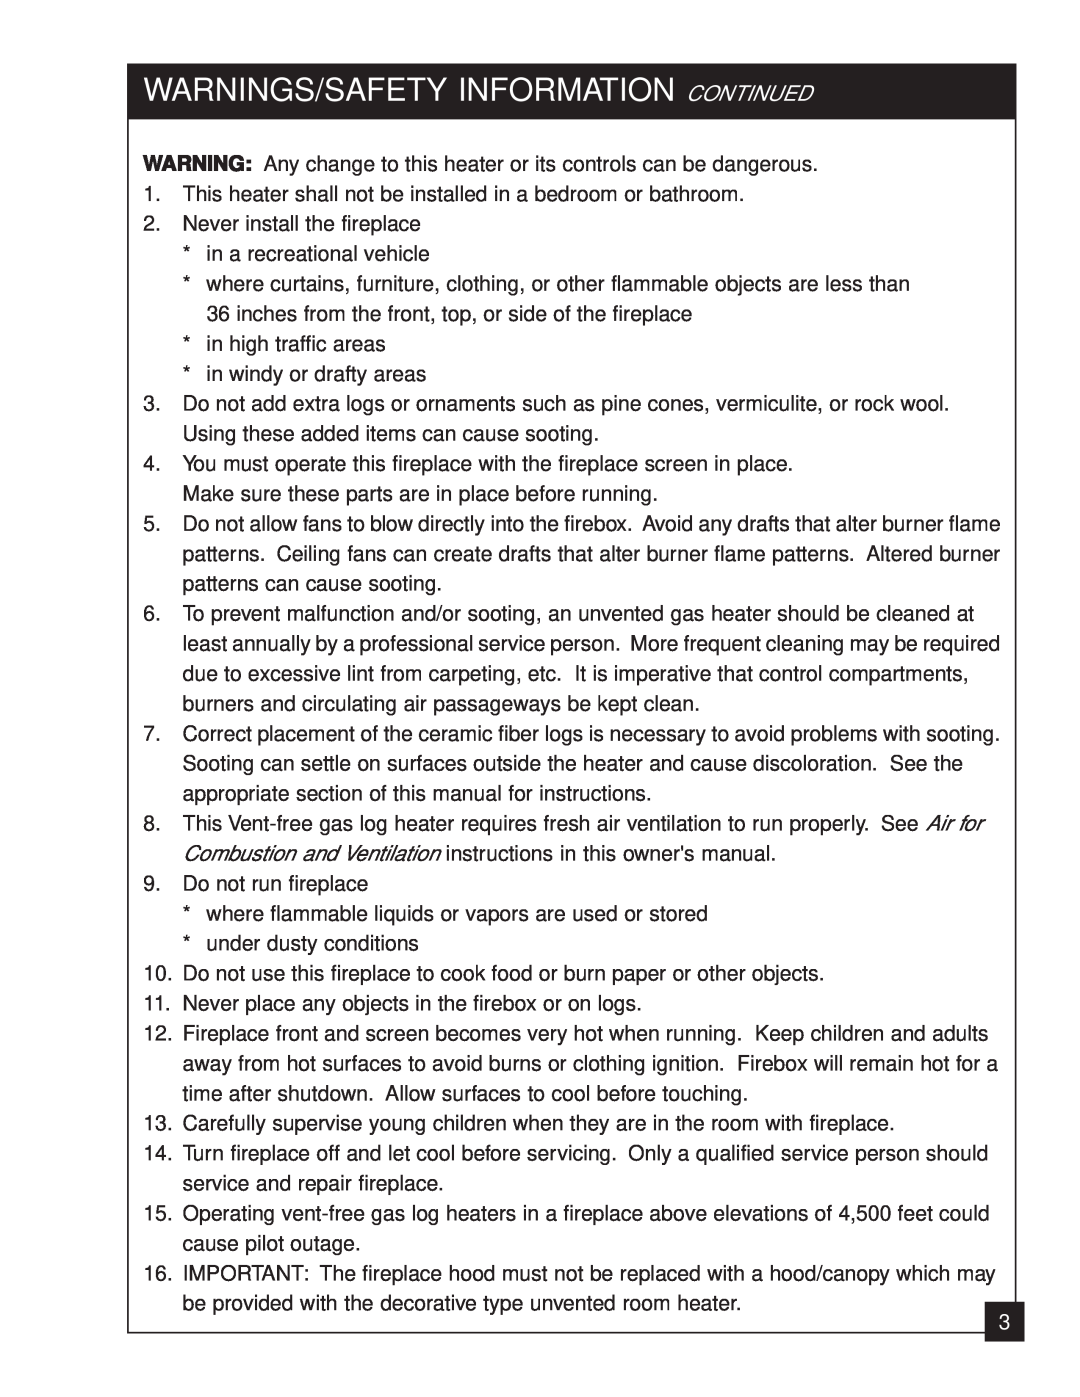 United States Stove 2020N manual Warnings/Safety Information Continued 